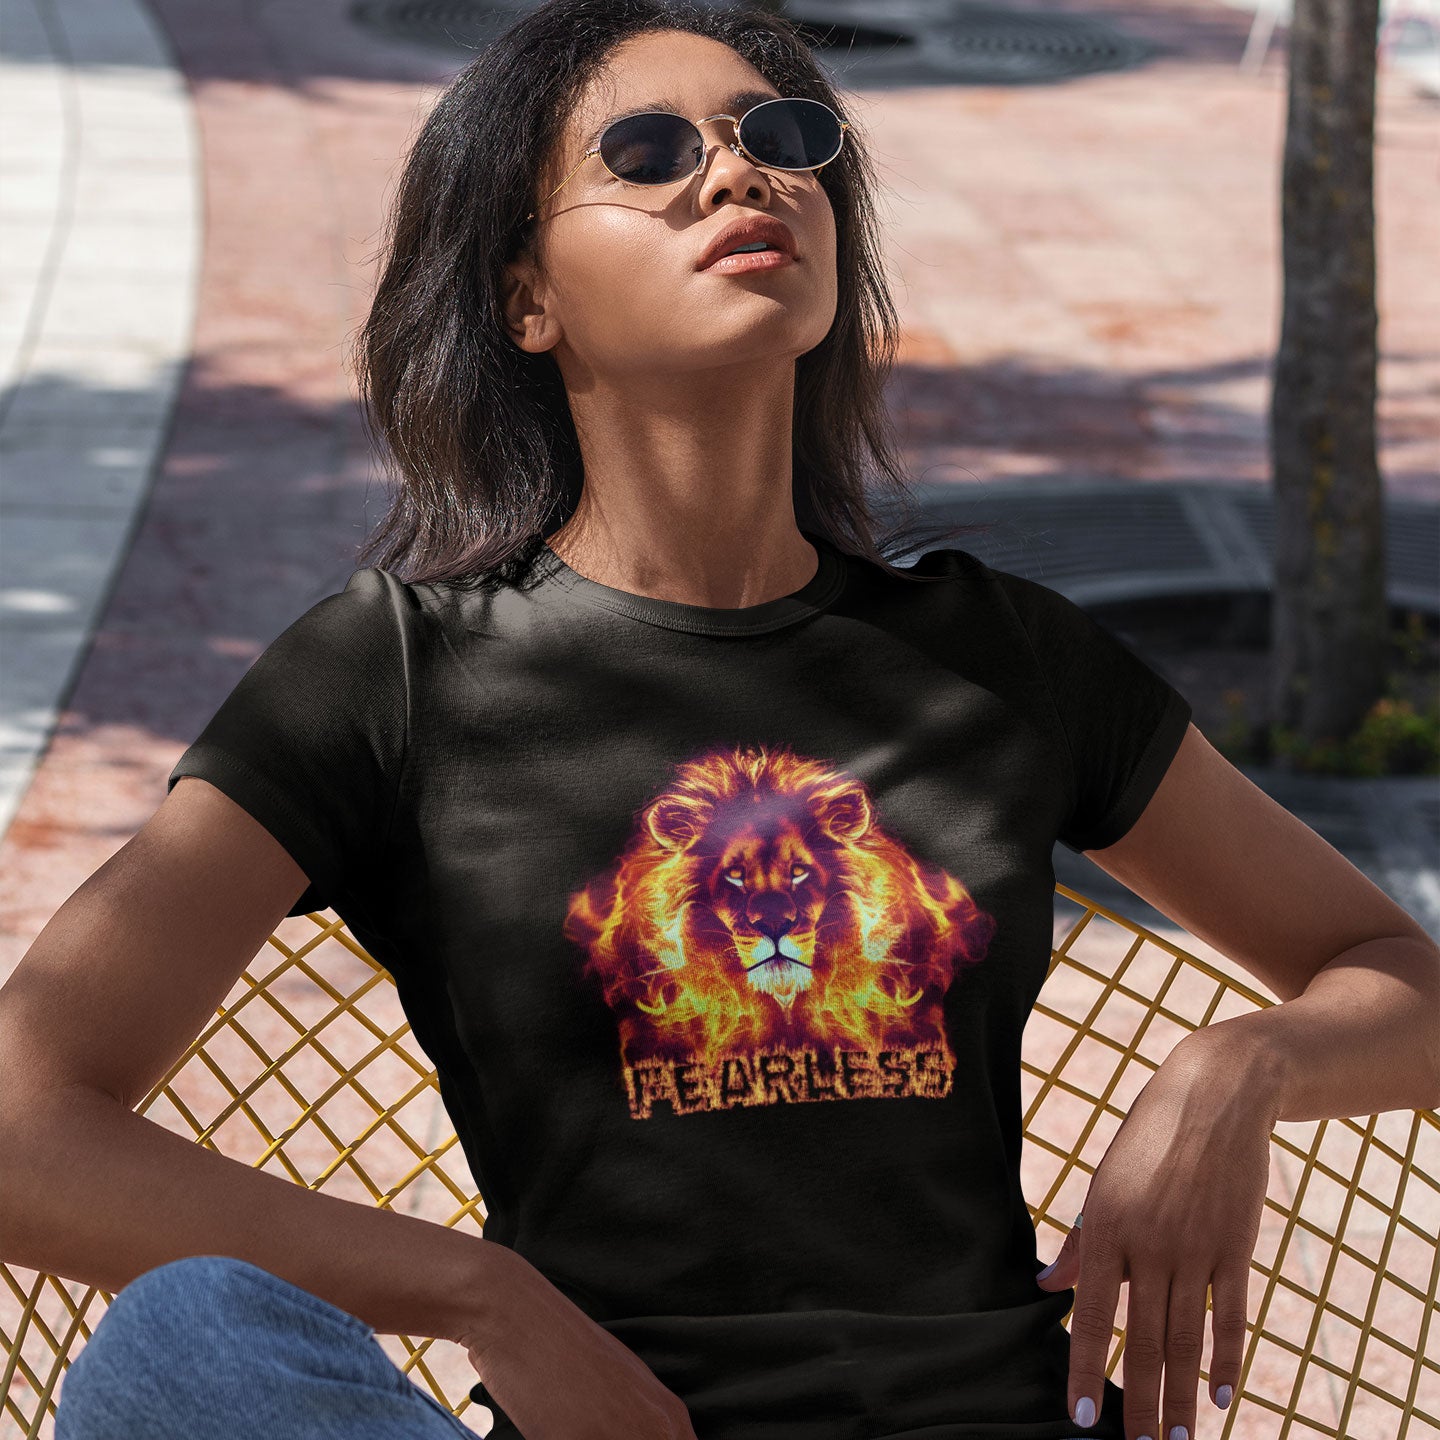 woman sitting in the sun wearing a black t-shirt with a flaming lion and fearless caption print